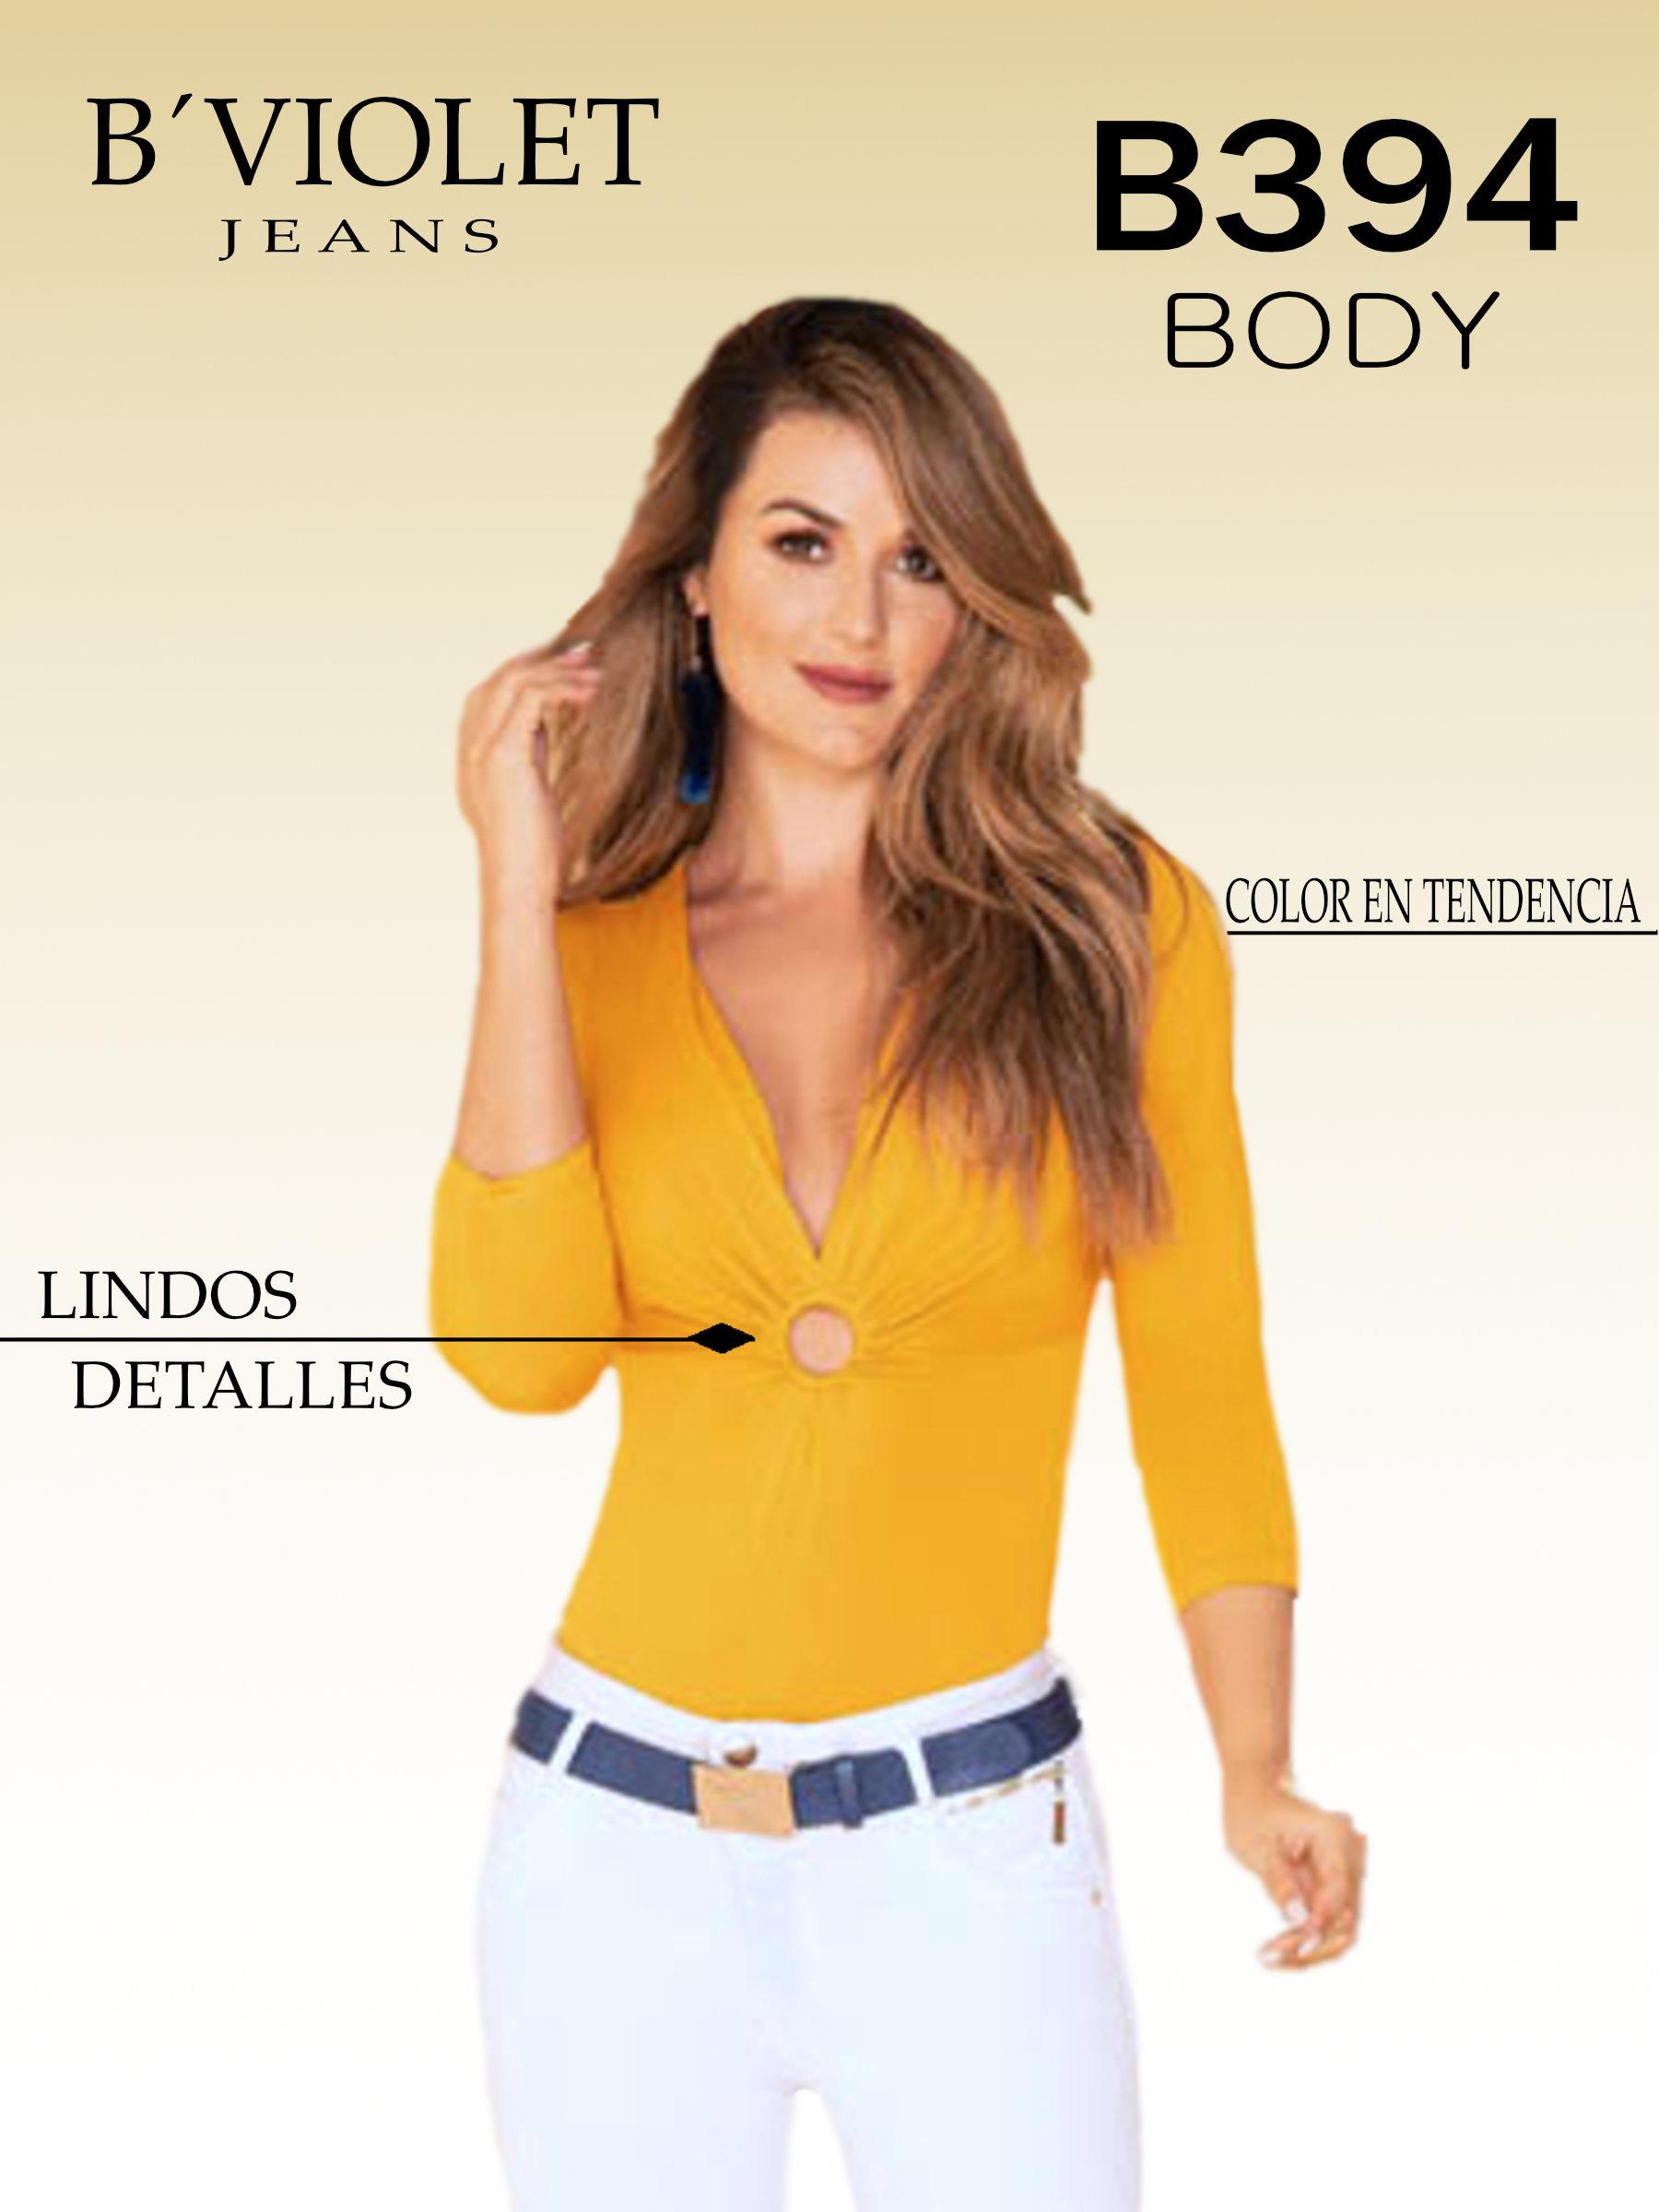 Trendy Colombian Body With Beautiful Mustard and Neckline